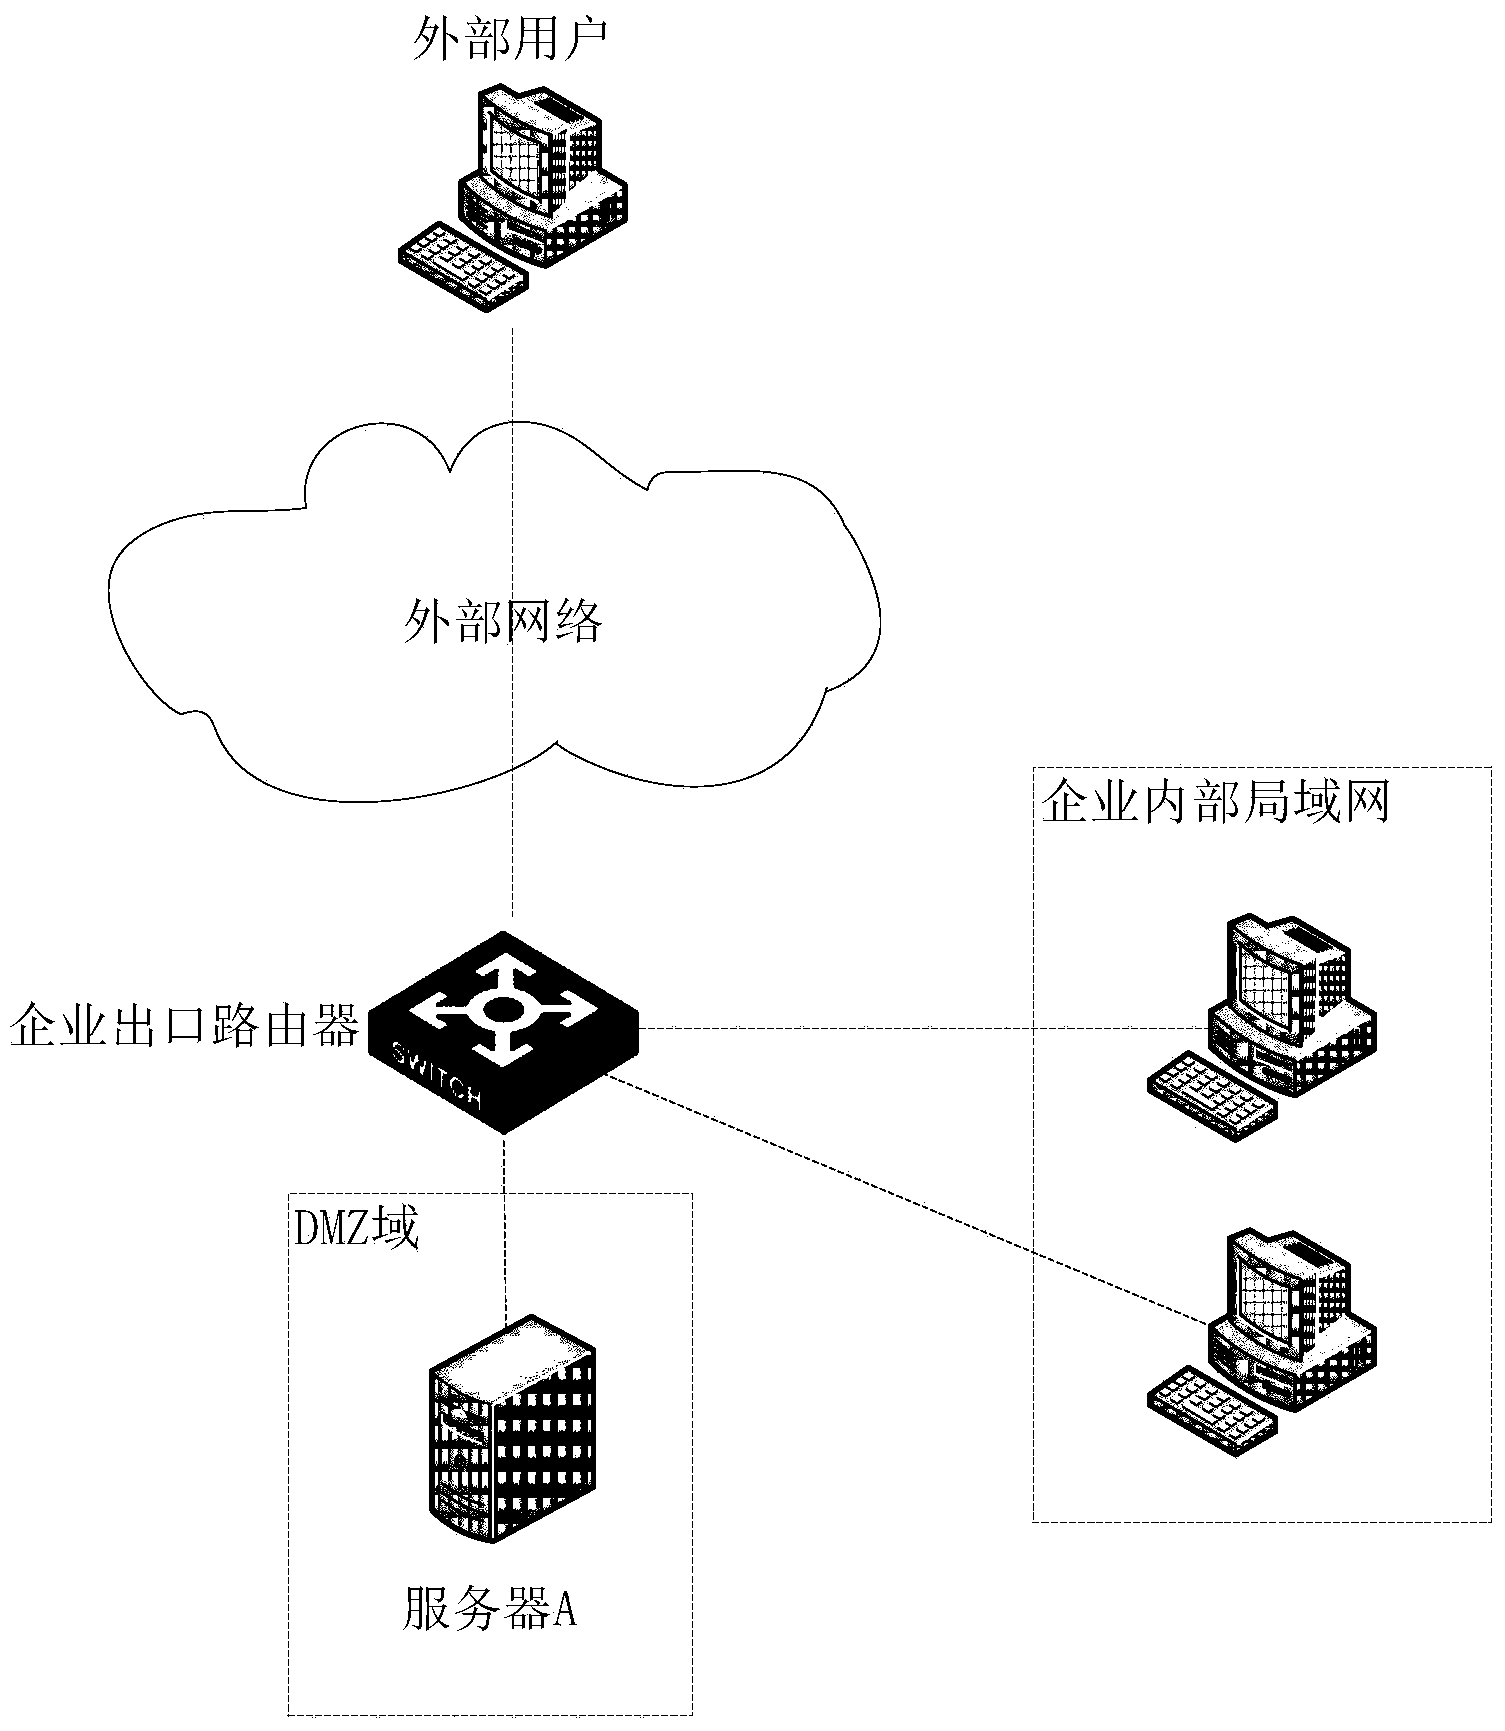 DMZ server switching method and device